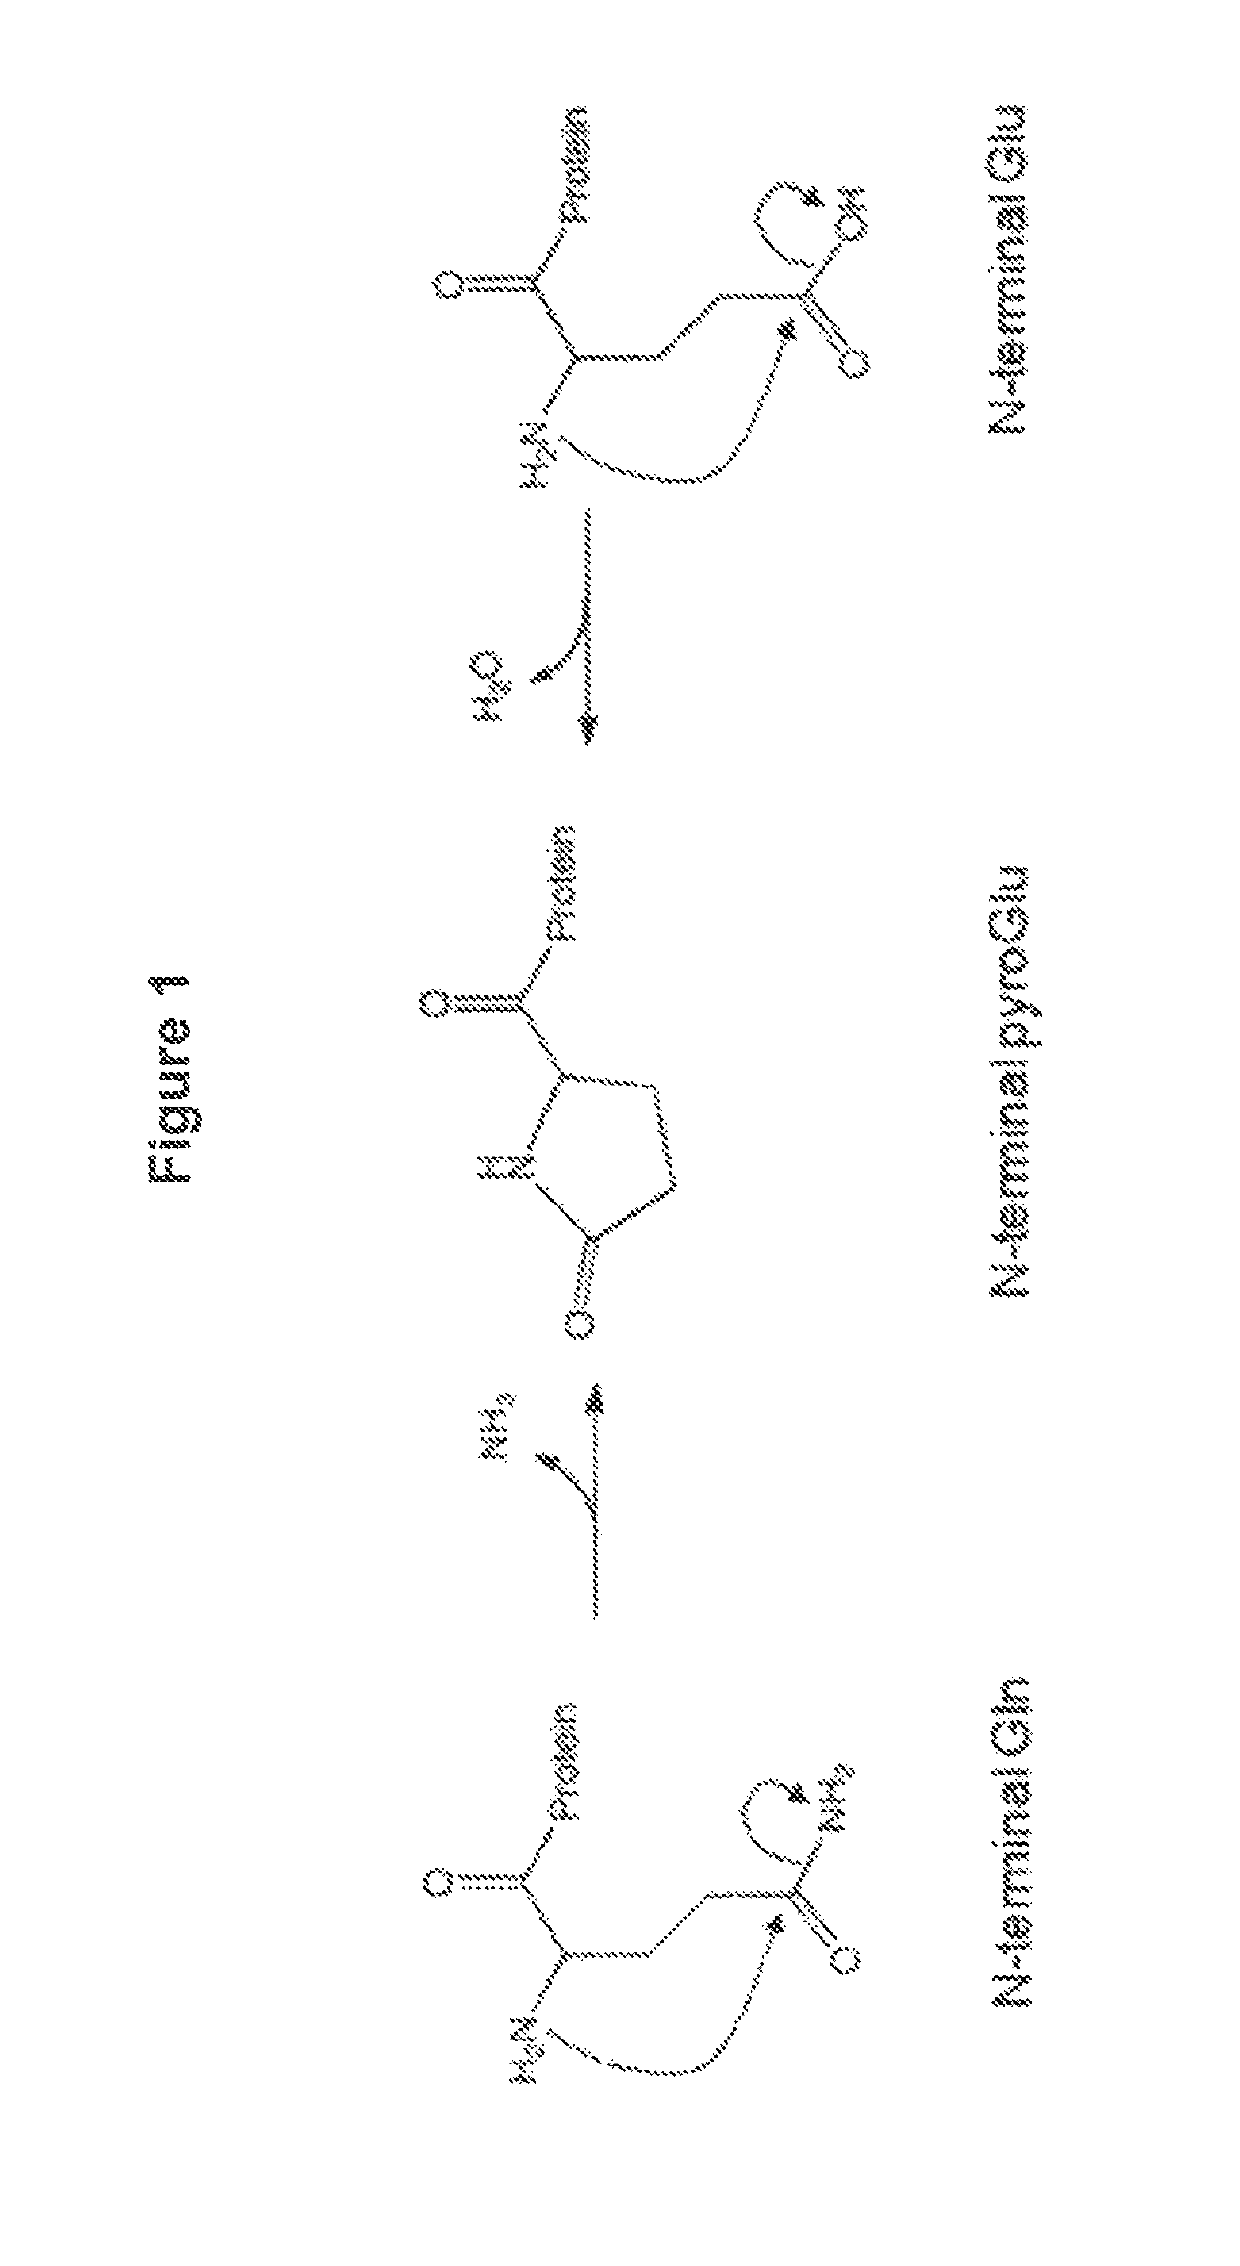 Method for increasing pyro-glutamic acid formation of a protein